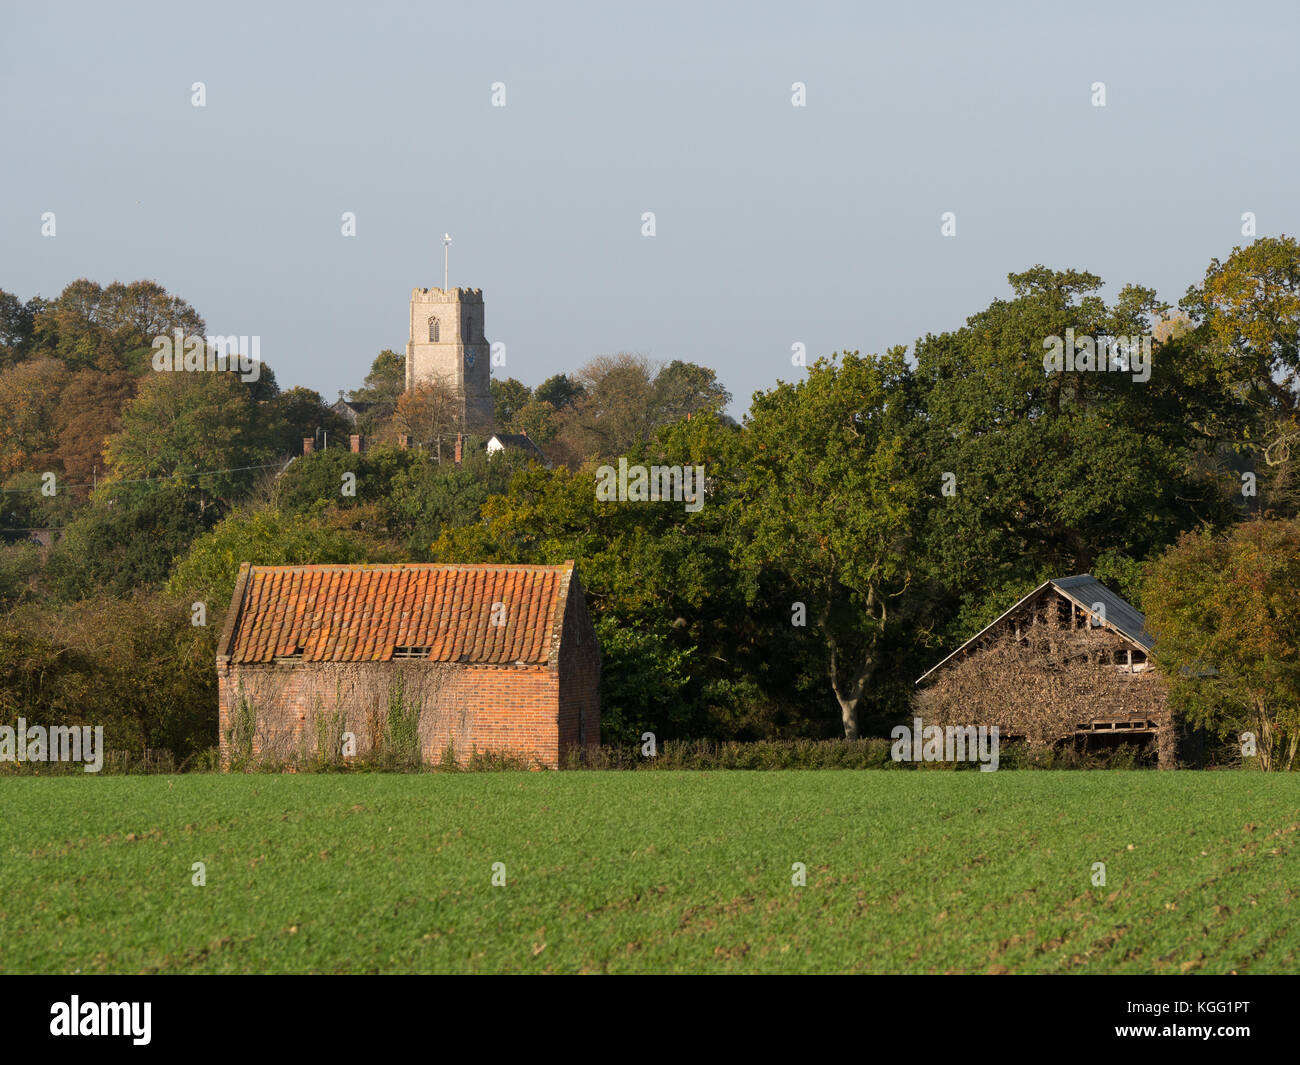 Traditional English rural landscape with brick farm building and church visible in the background Stock Photo